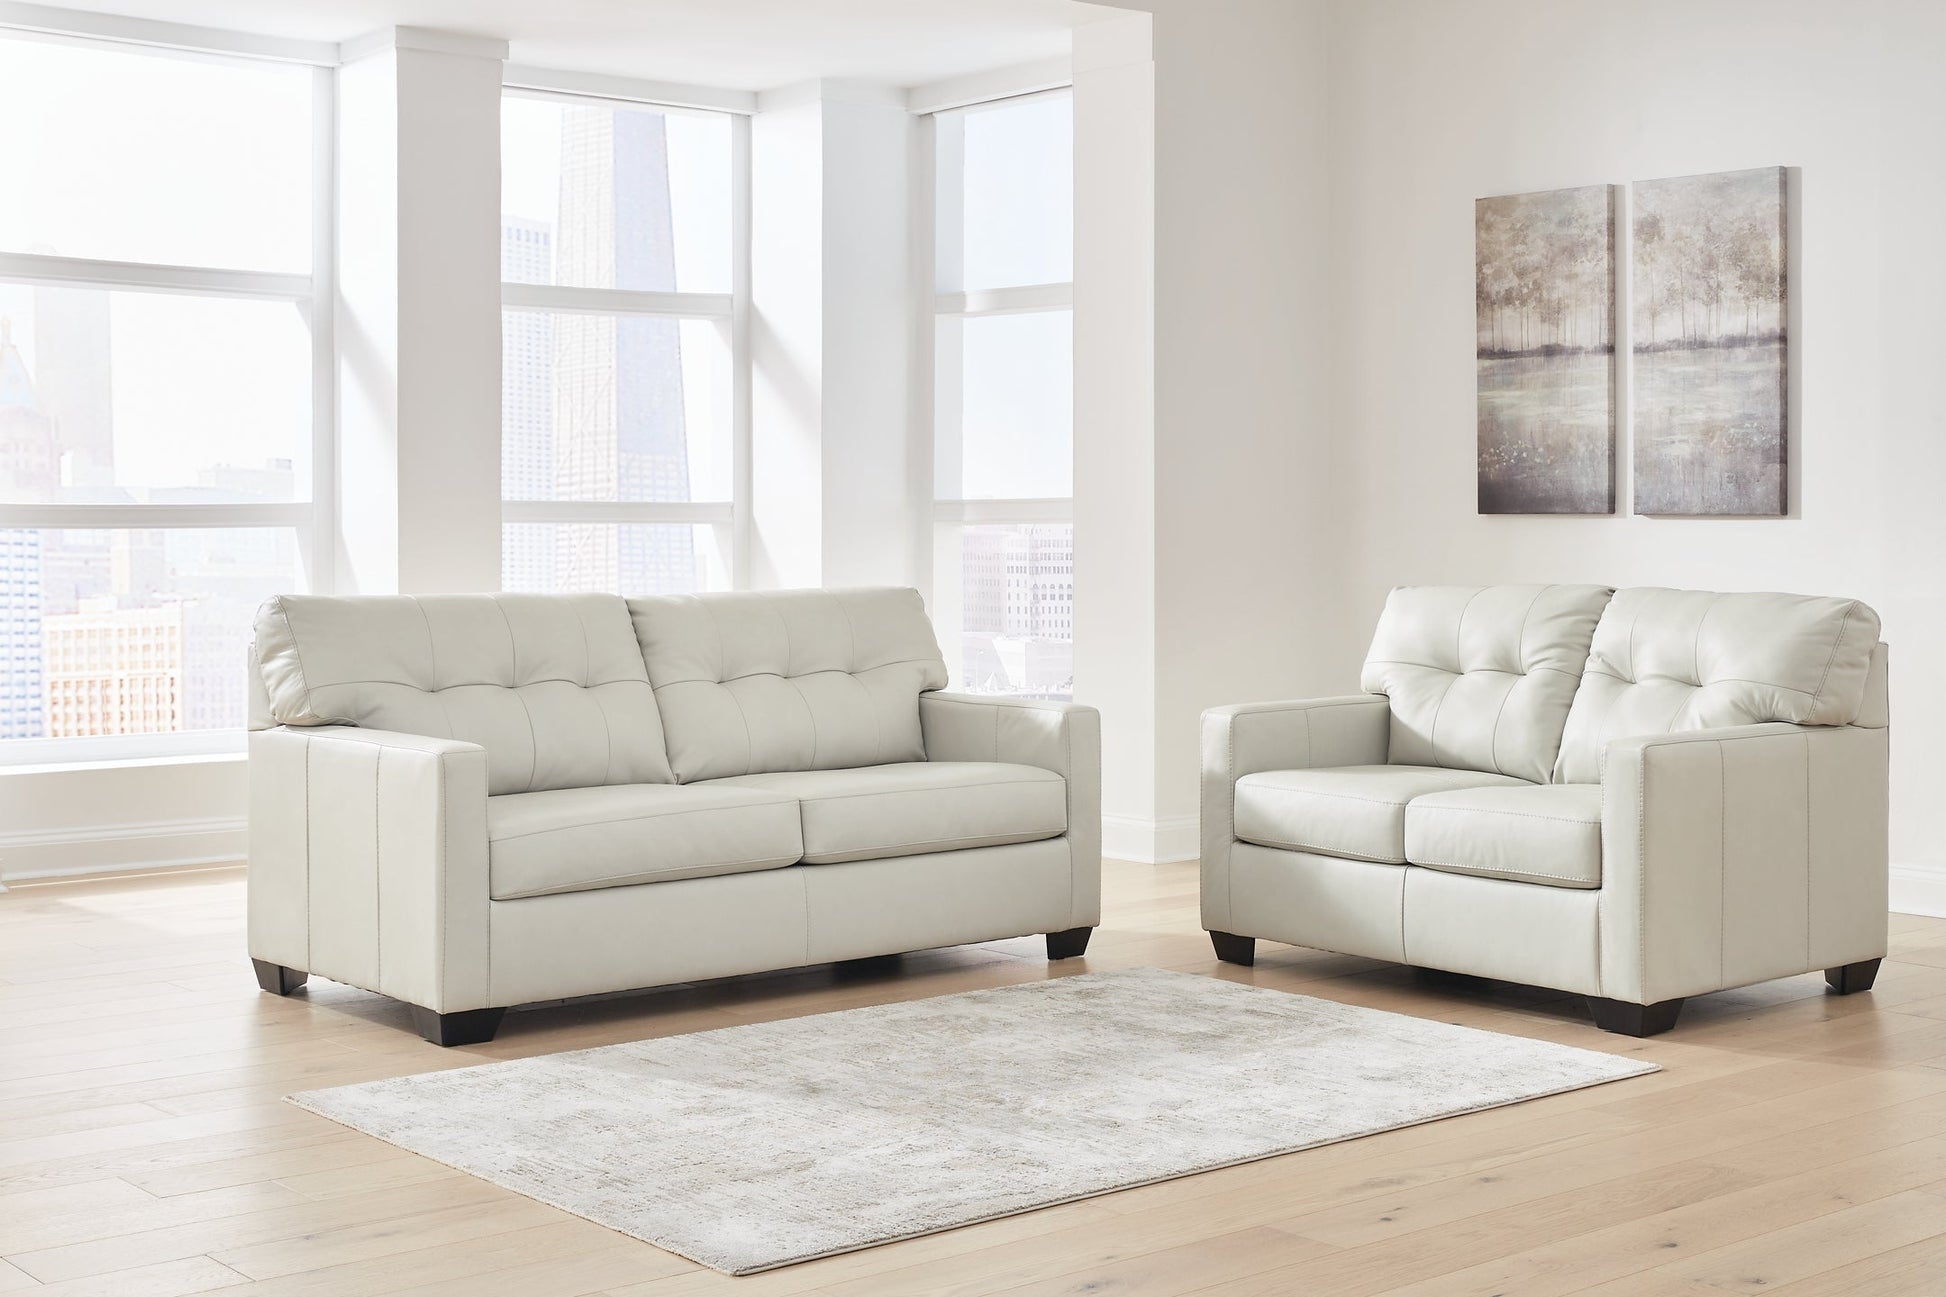 Belziani Sofa and Loveseat at Walker Mattress and Furniture Locations in Cedar Park and Belton TX.